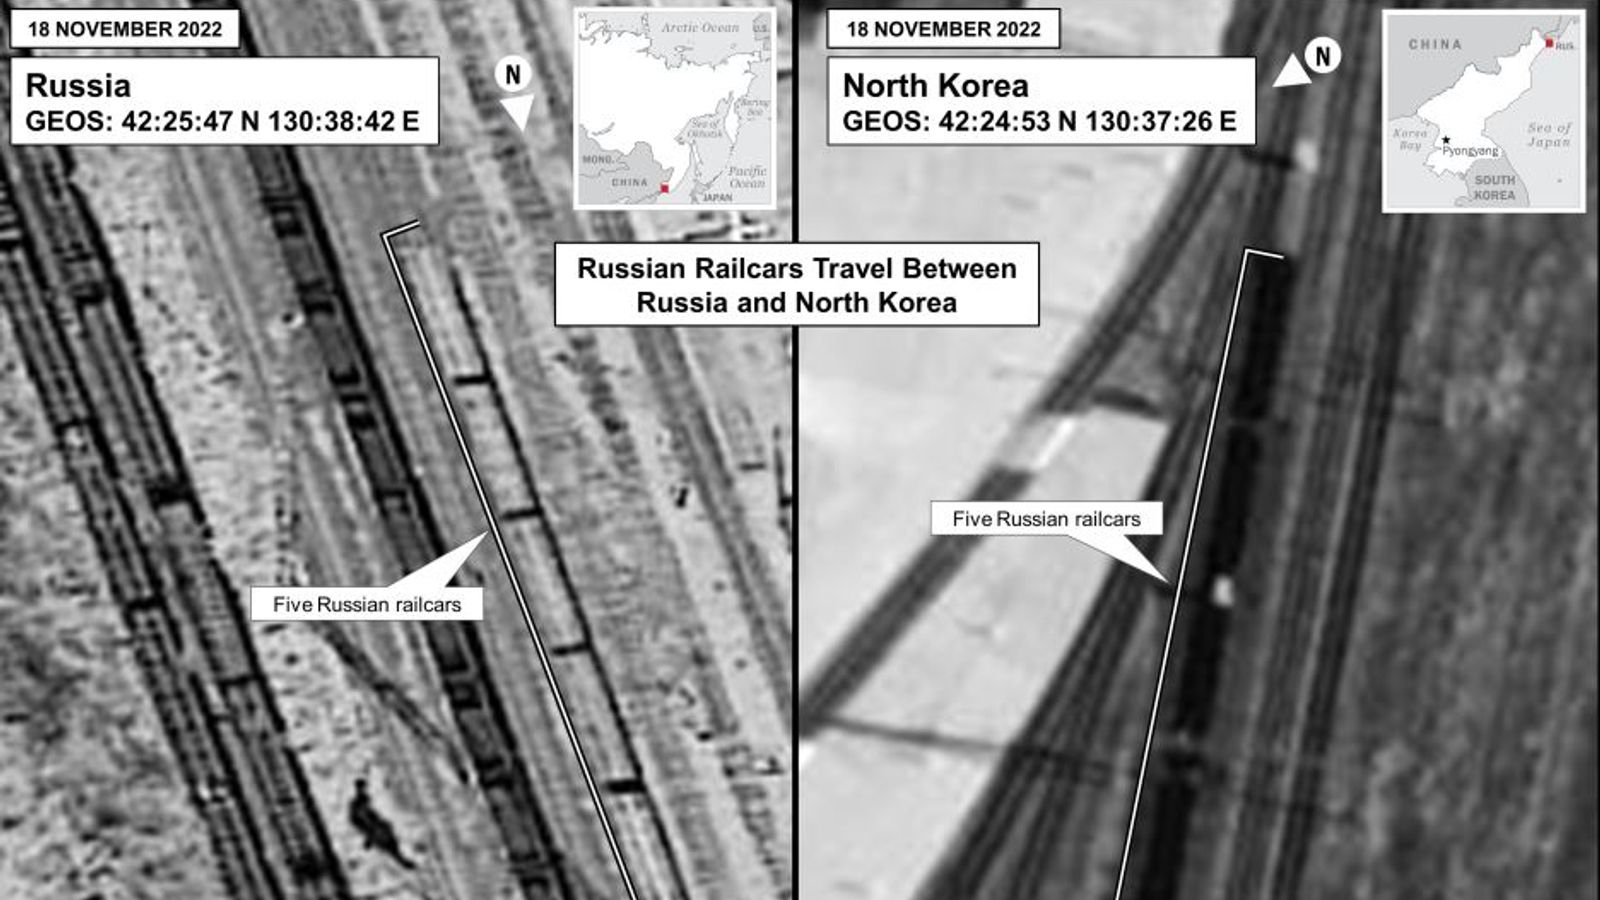 Ukraine war: Russian train collected weapons from North Korea for Wagner mercenaries, US says | World News